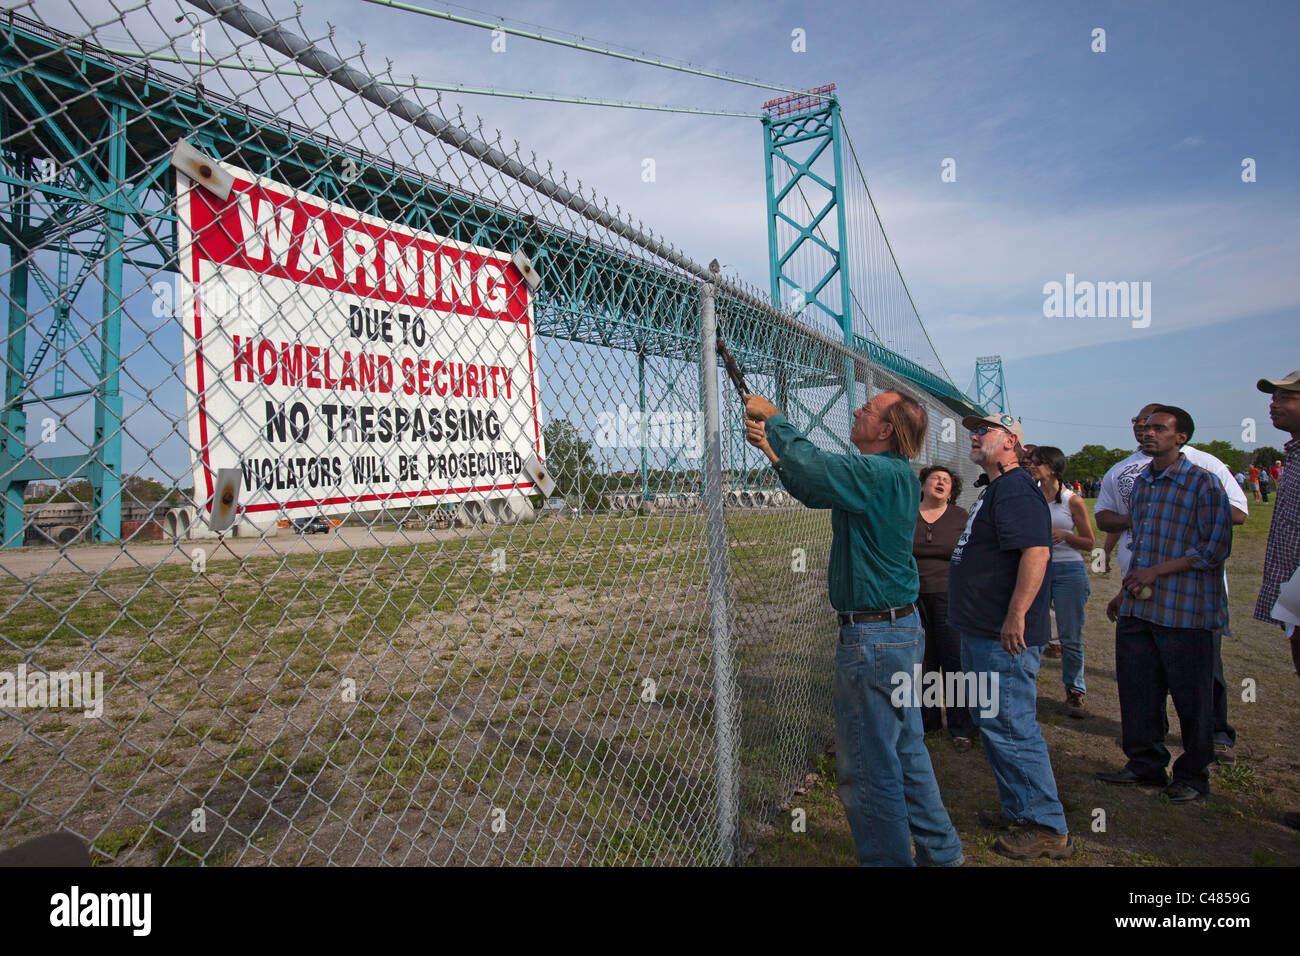 Community Activists Remove Fence Illegally Erected in Name of 'Homeland Security' Stock Photo